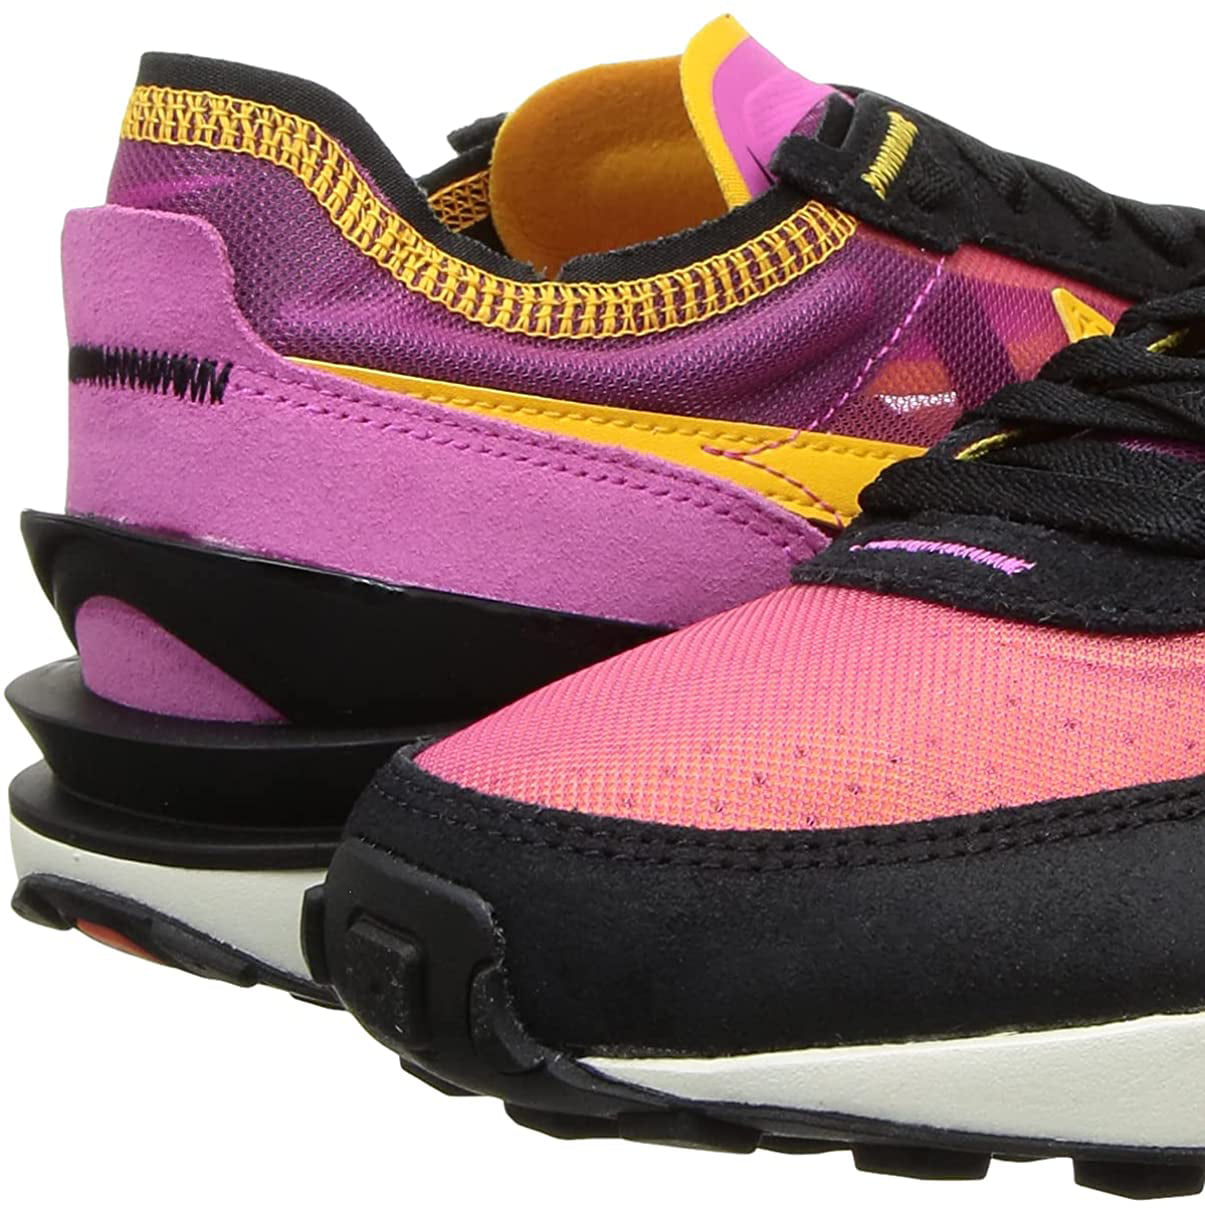 Nike Waffle One Mens Running Trainers Da7995 Sneakers Shoes 11 Active Fuchsia/University Gold